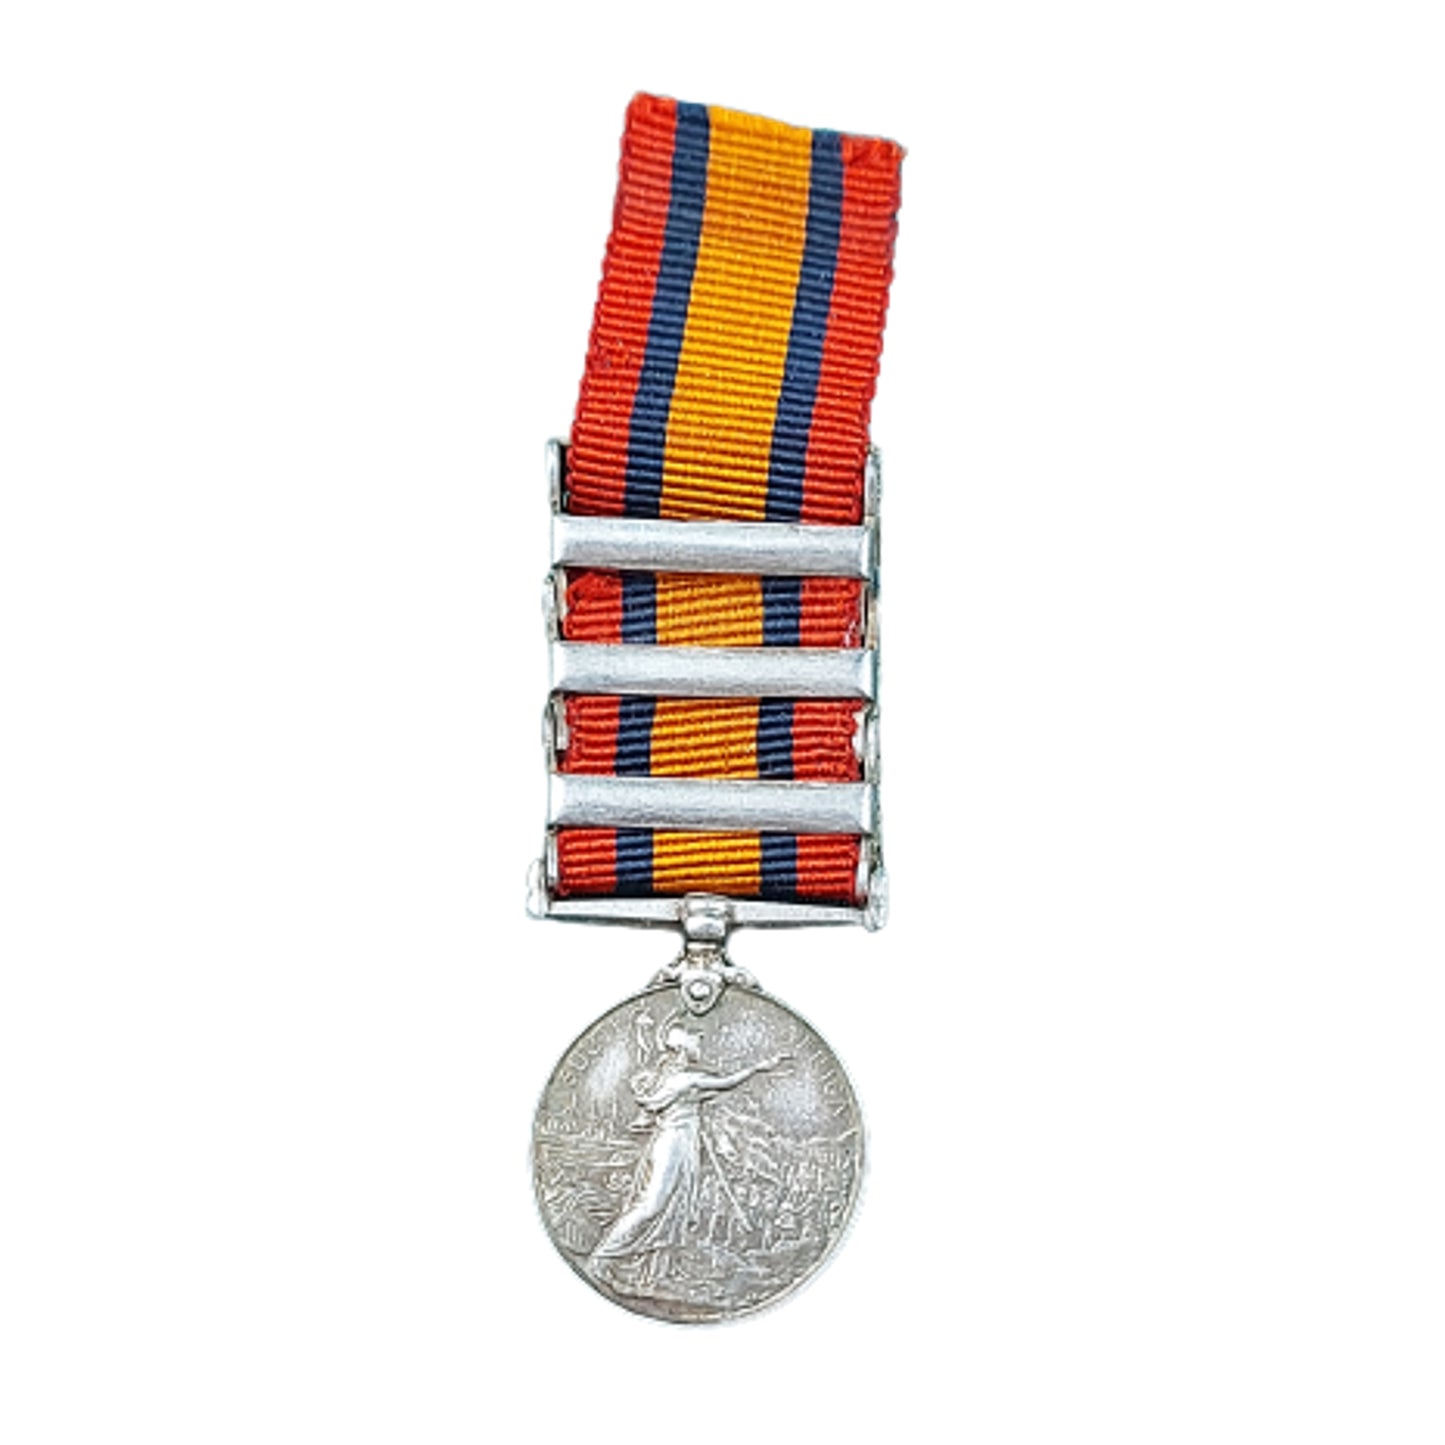 Miniature Canadian-British QSA Queen's South Africa Medal With 6 Bars